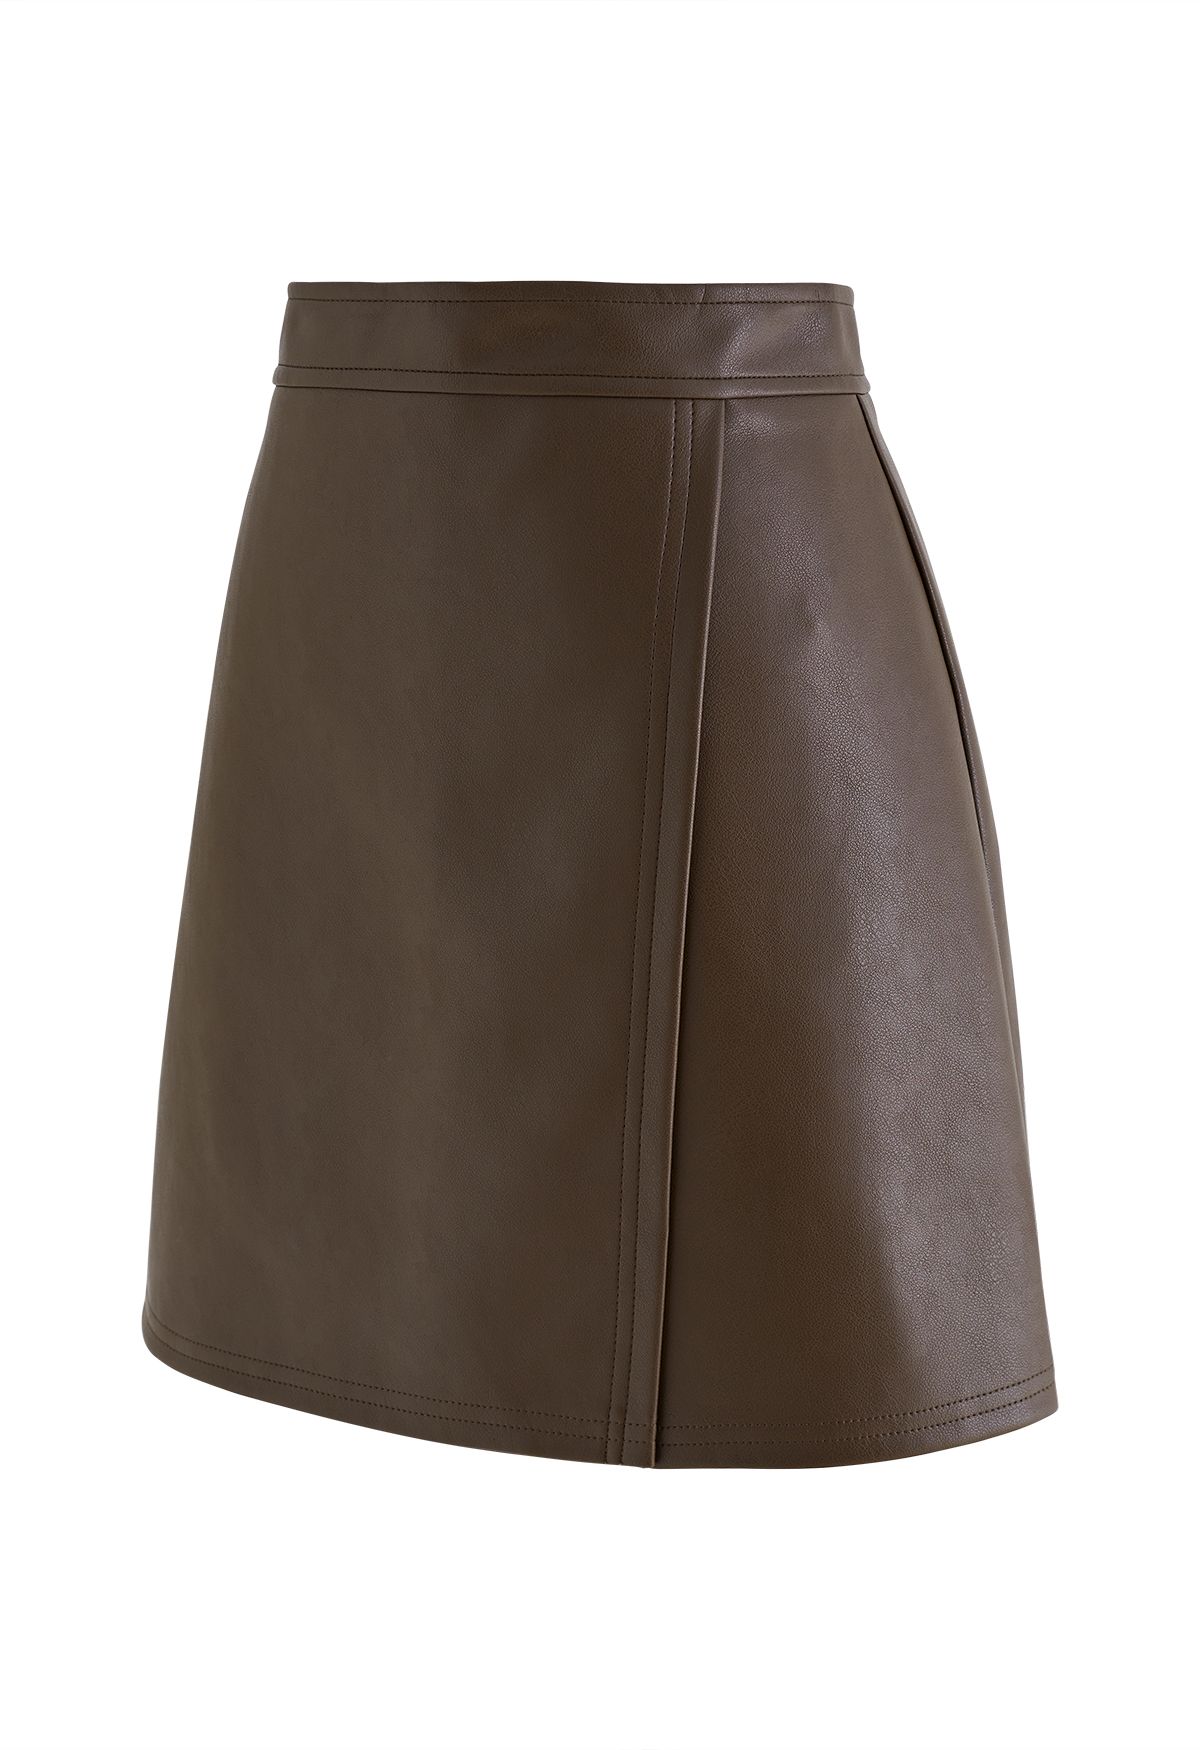 Nifty Faux Leather Flap Mini Bud Skirt in Brown - Retro, Indie and ...